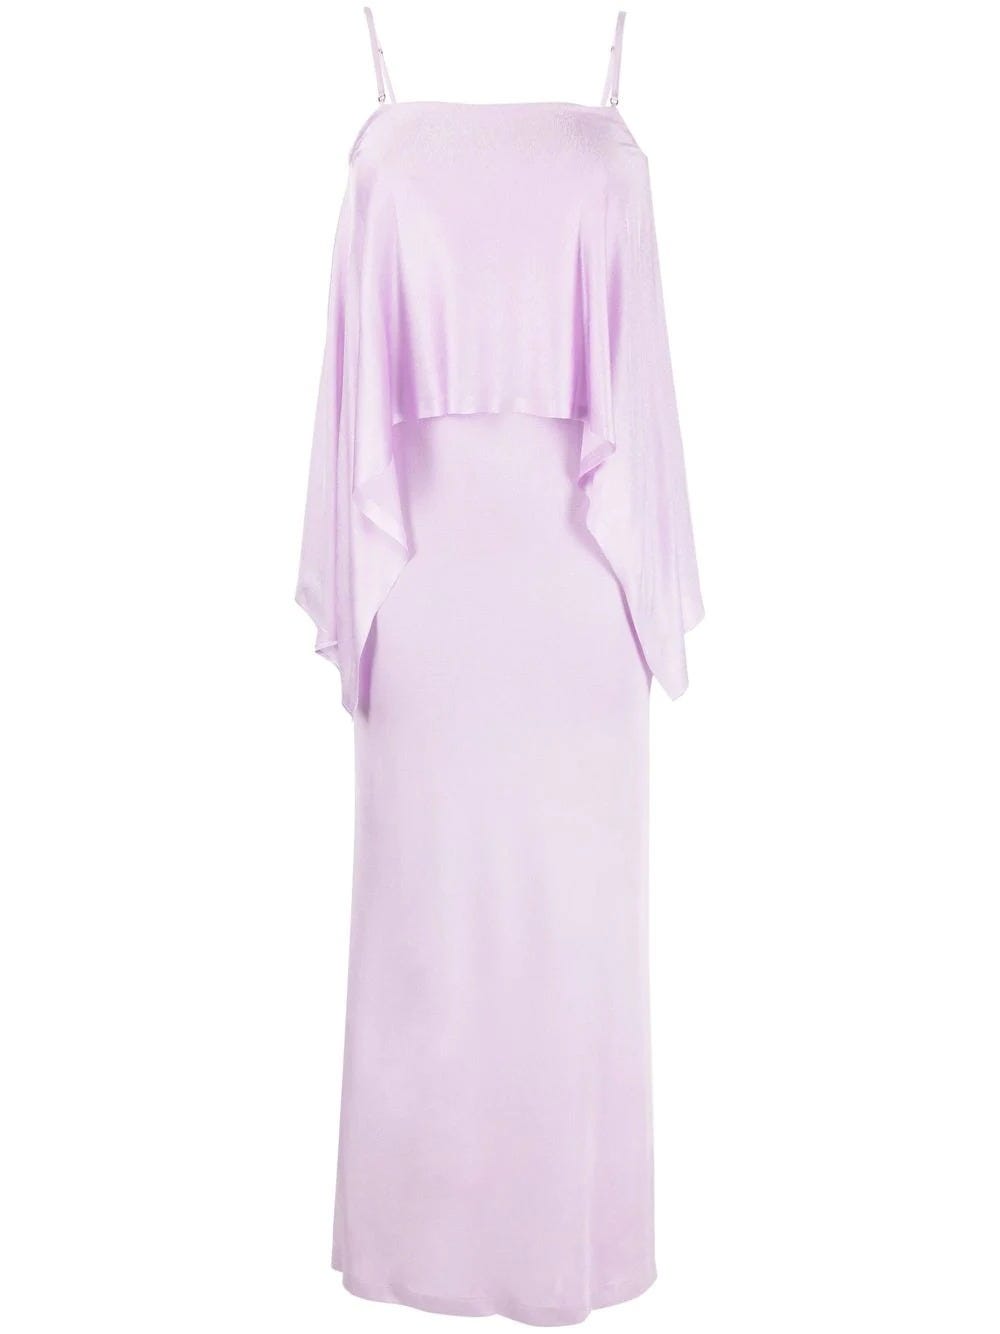 TOM FORD LILAC LONG DRESS WITH RUFFLES